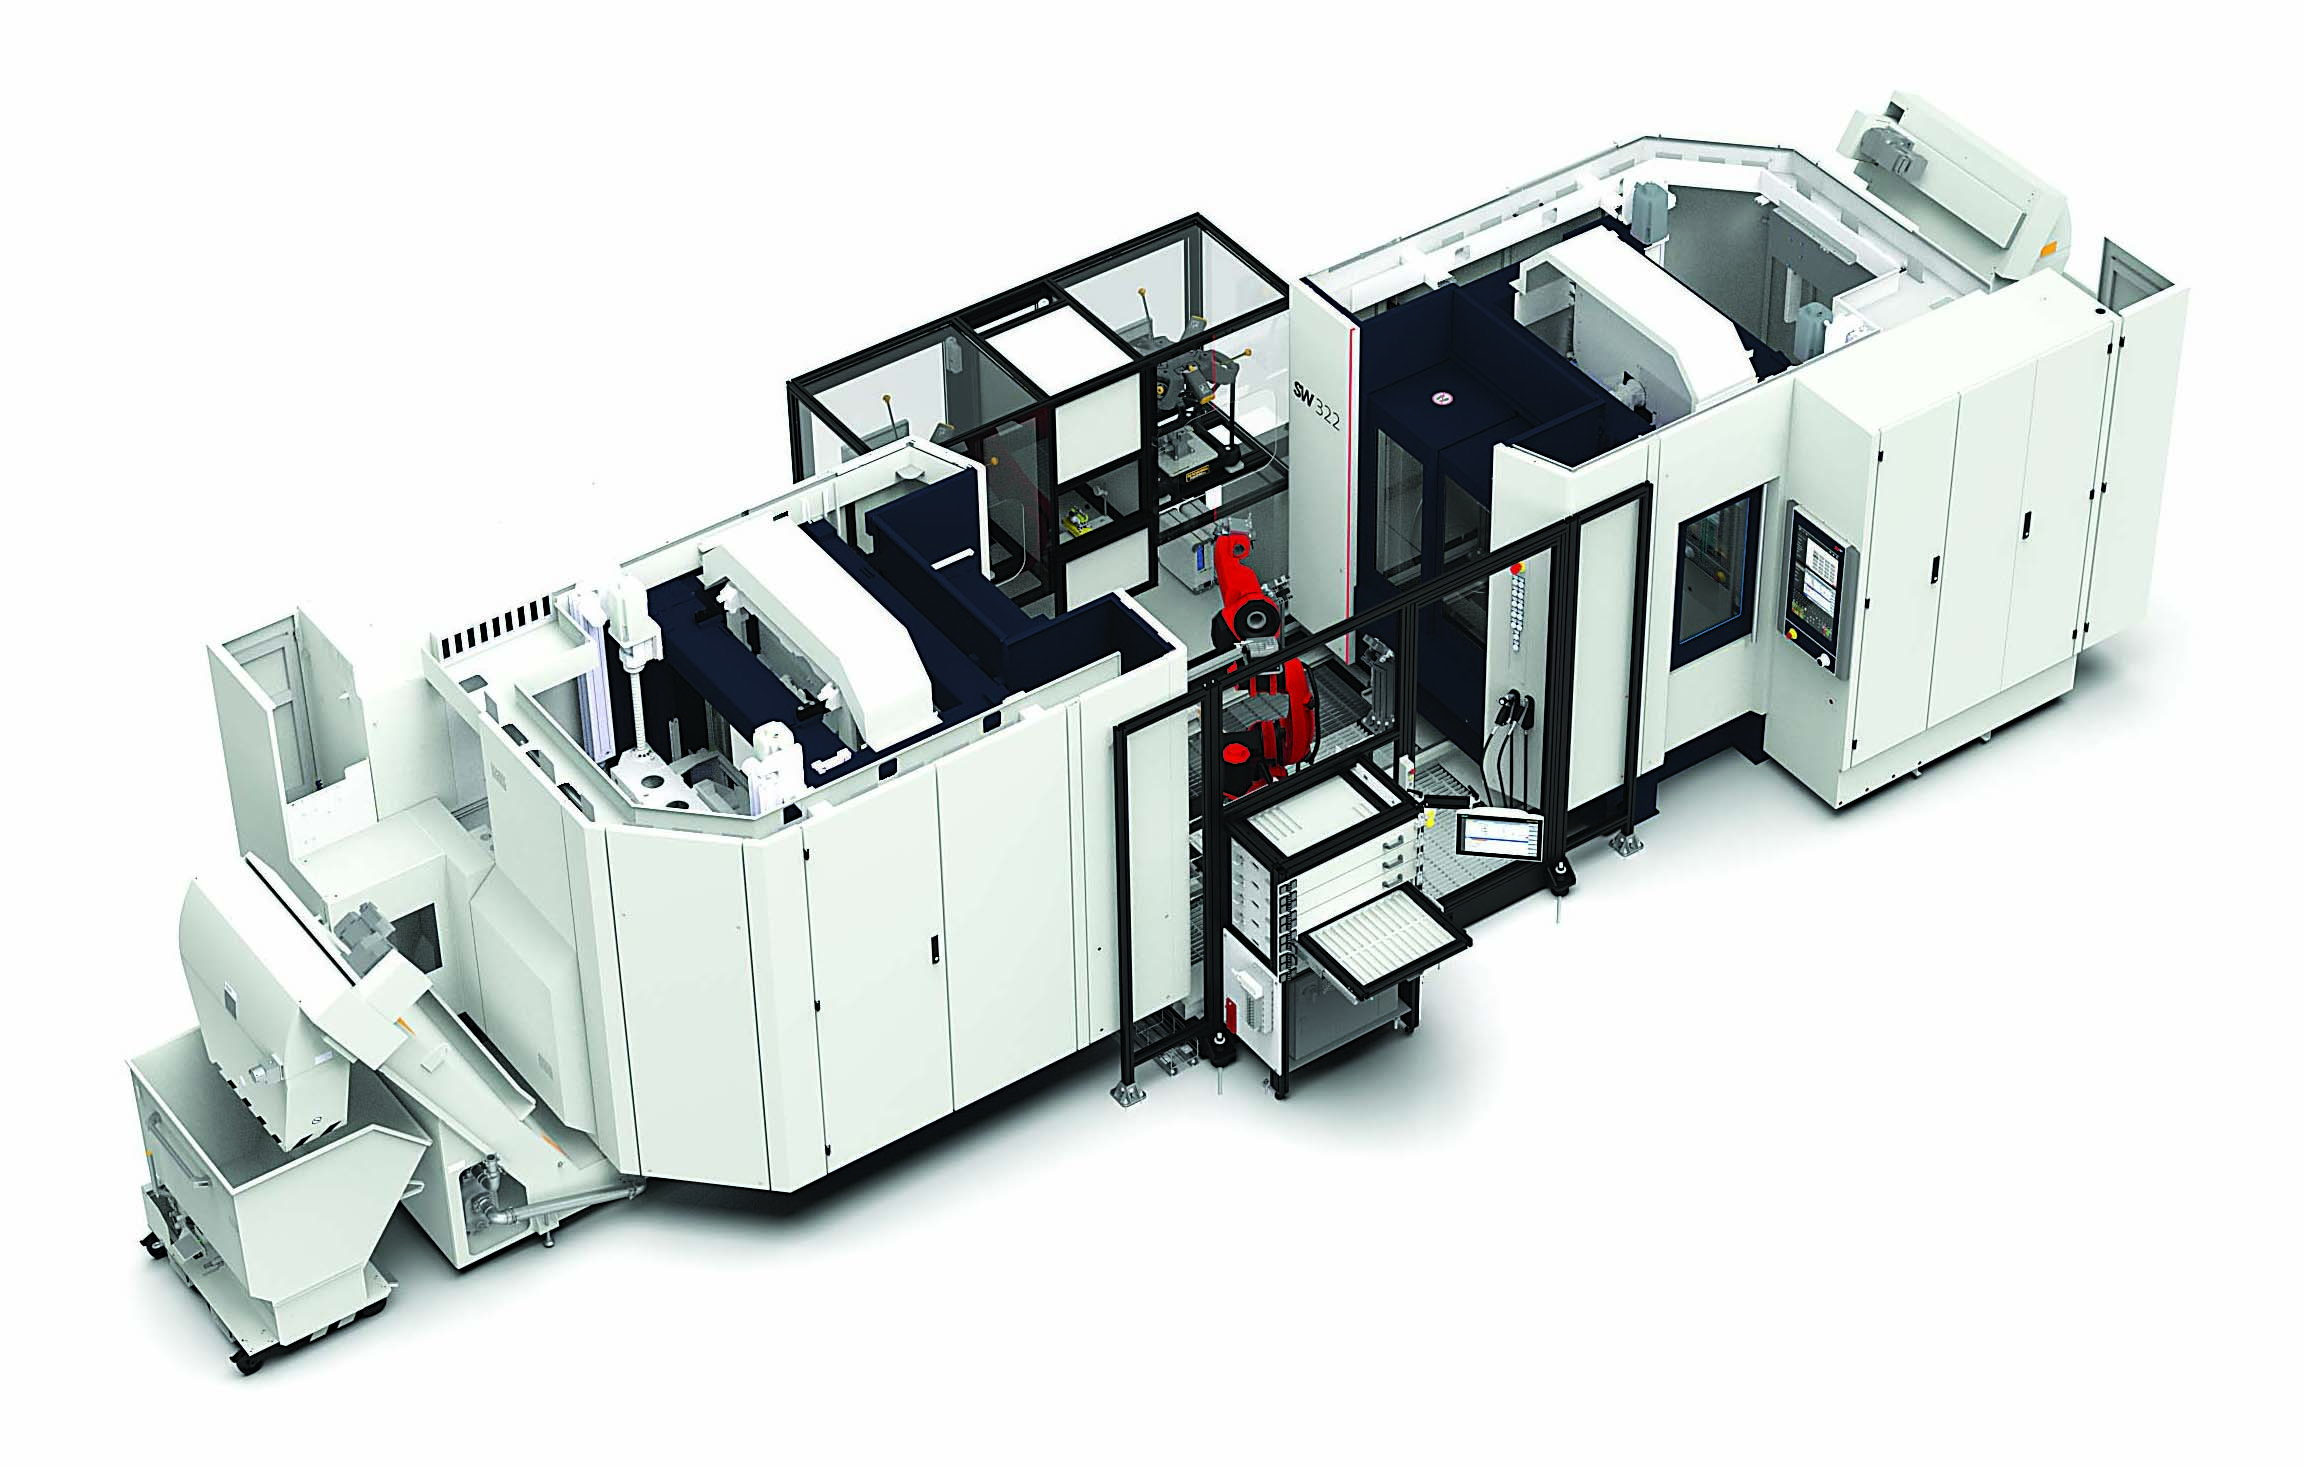 This complete production system (shown above) includes two horizontal machining centers, robot automation, shop floor comparators, a laser marker and a part storage unit.